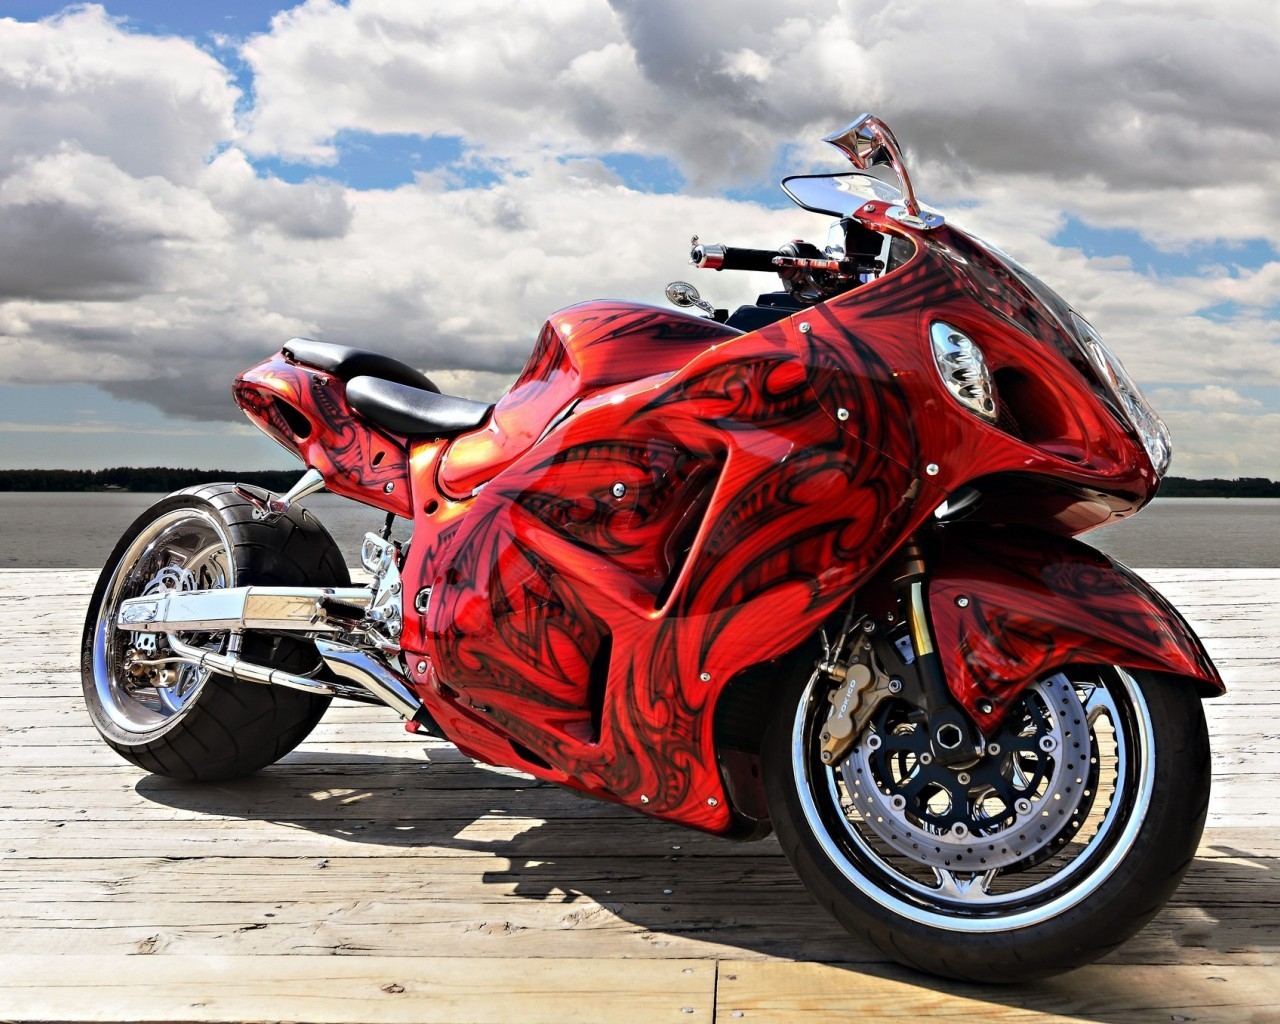 Gorgeous Red Motorcycle for 1280 x 1024 resolution